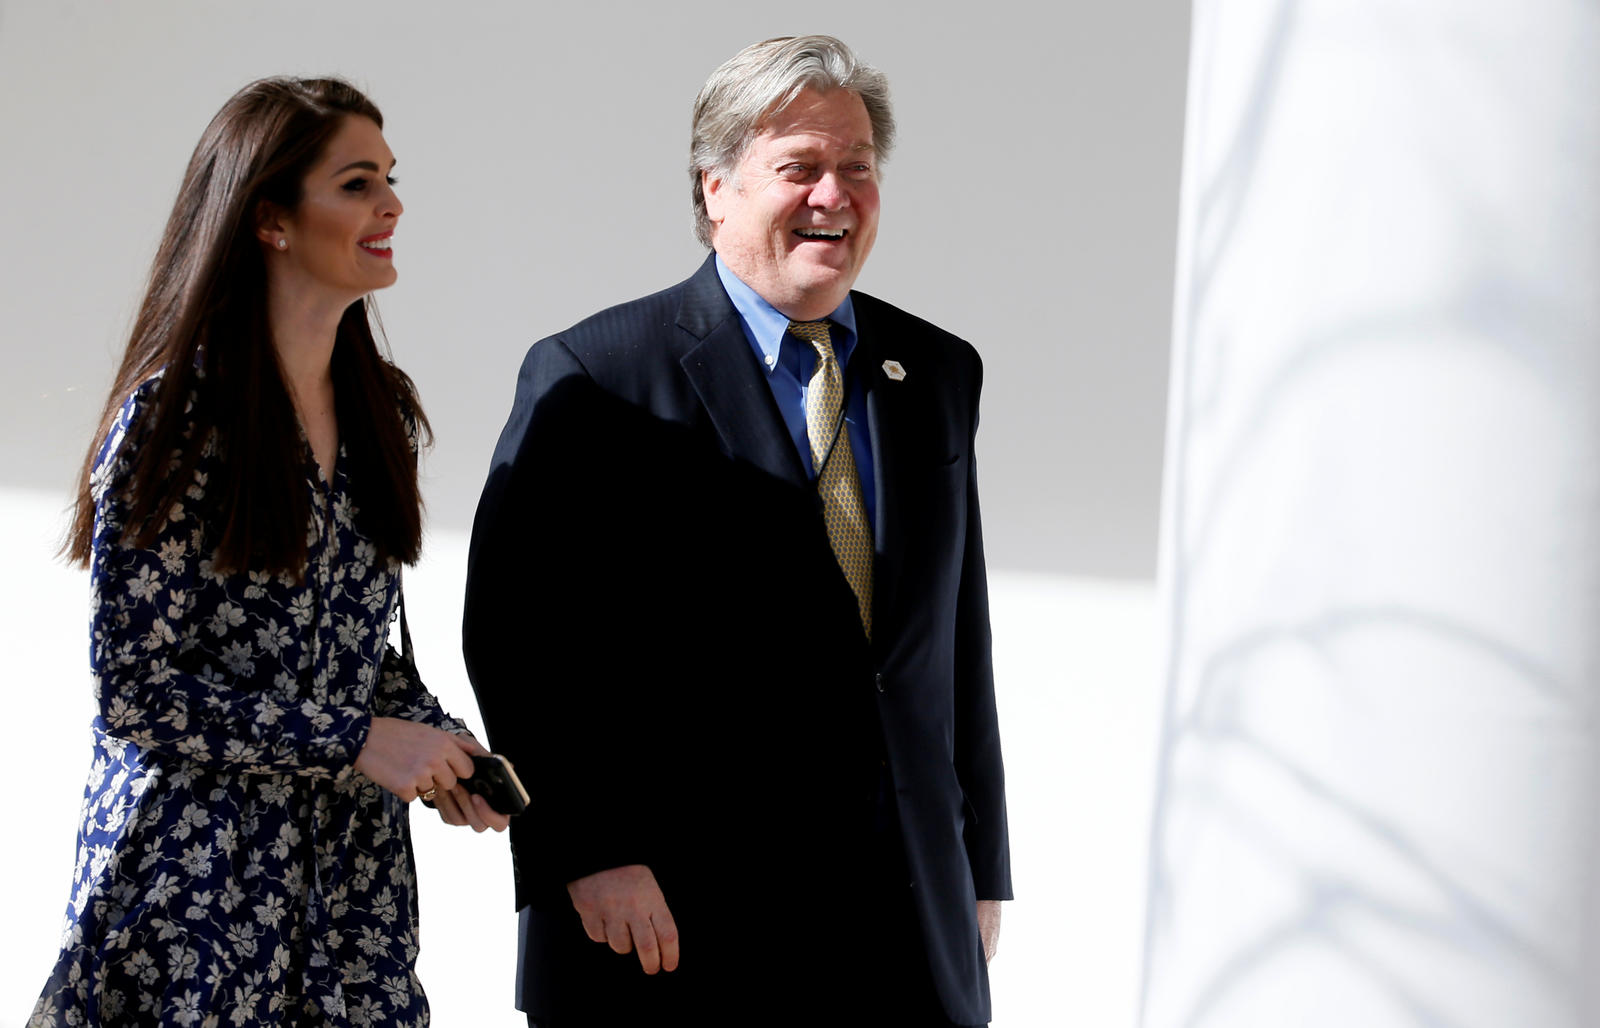 White House Chief Strategist Bannon and senior adviser Hicks walk to joint press conference at the White House in Washington